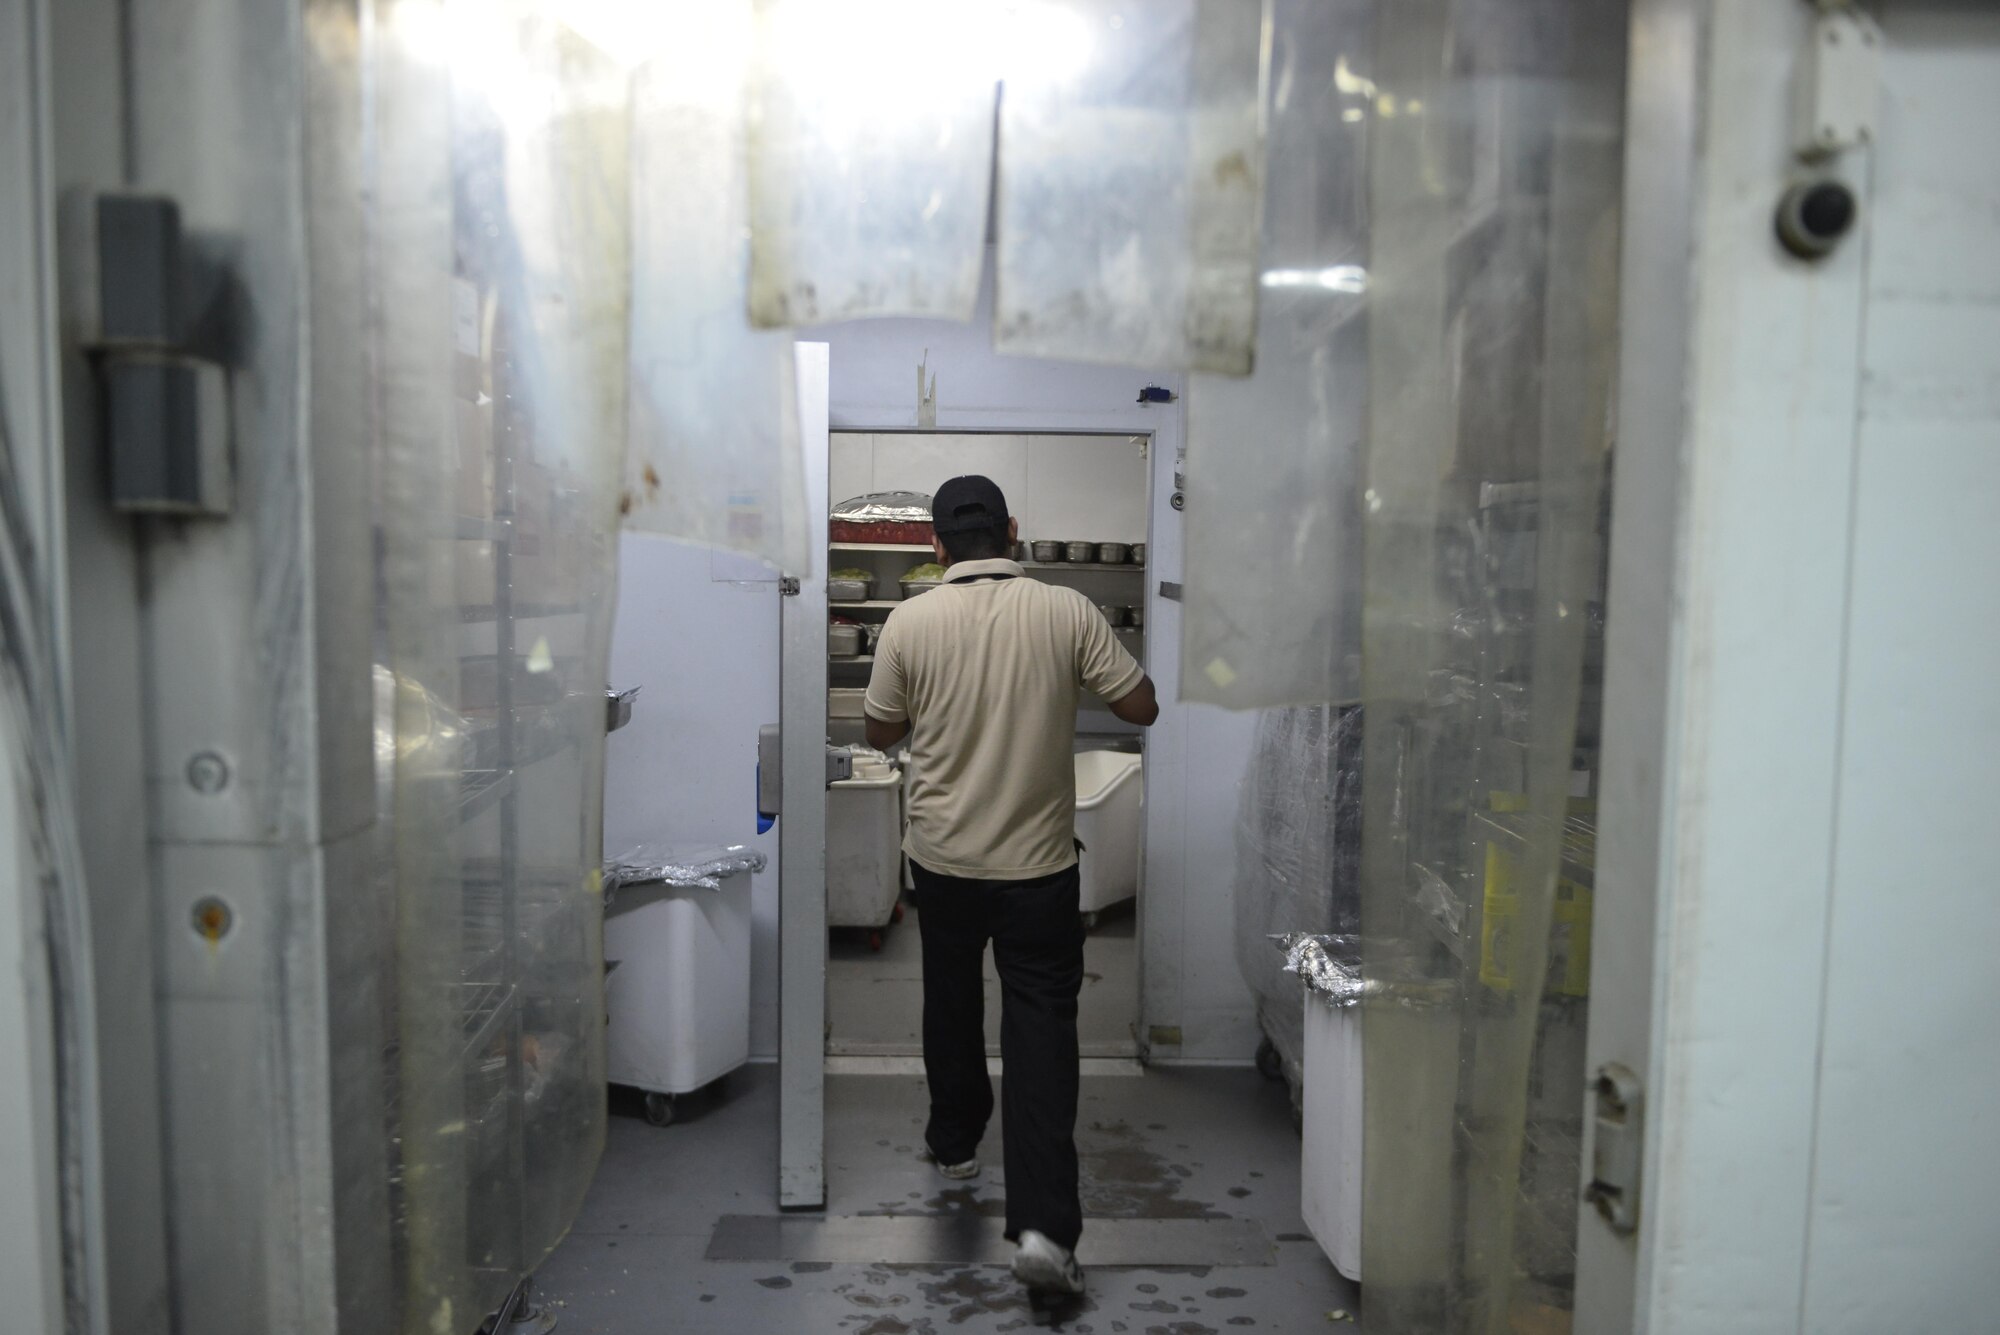 A dining facility member stores a pan of food in the industrial walk-in freezer at the Independence Dining Facility at Al Udeid Air Base, Qatar July 21, 2015. (U.S. Air Force photo/Staff Sgt. Alexandre Montes)